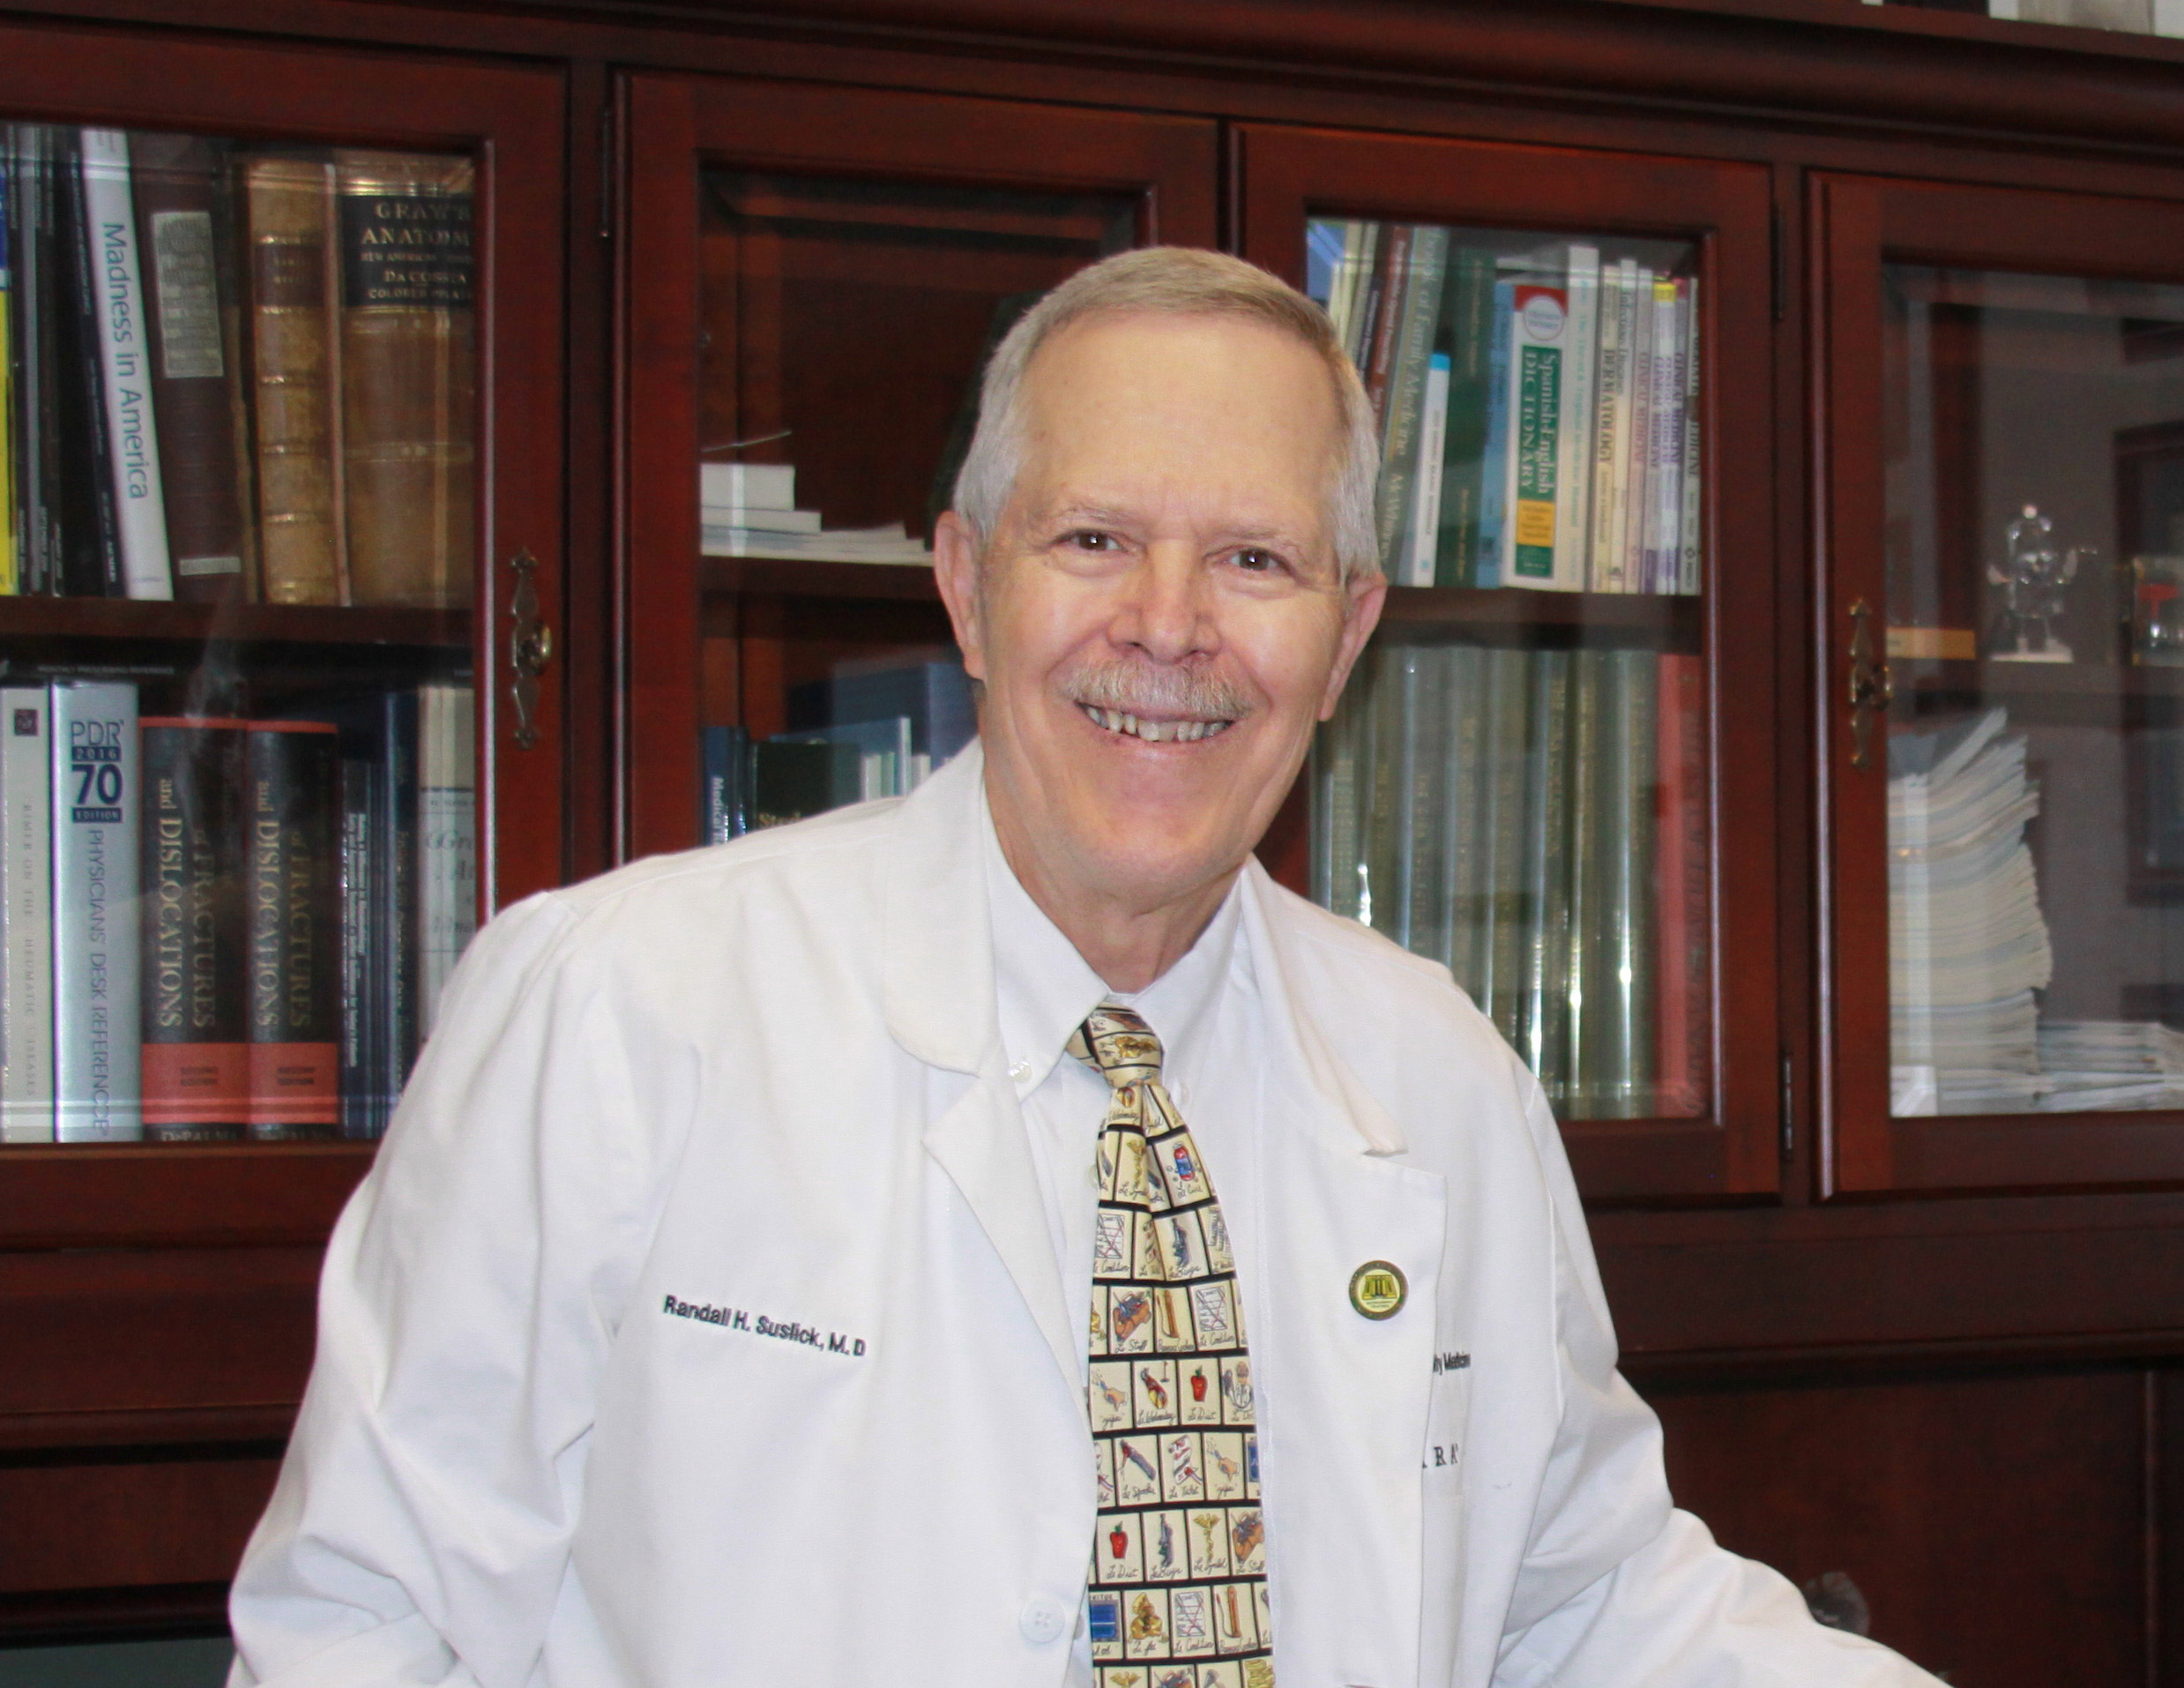 Randall Suslick, M'73, sits at his desk, smiling and wearing his white doctor's coat and a tie